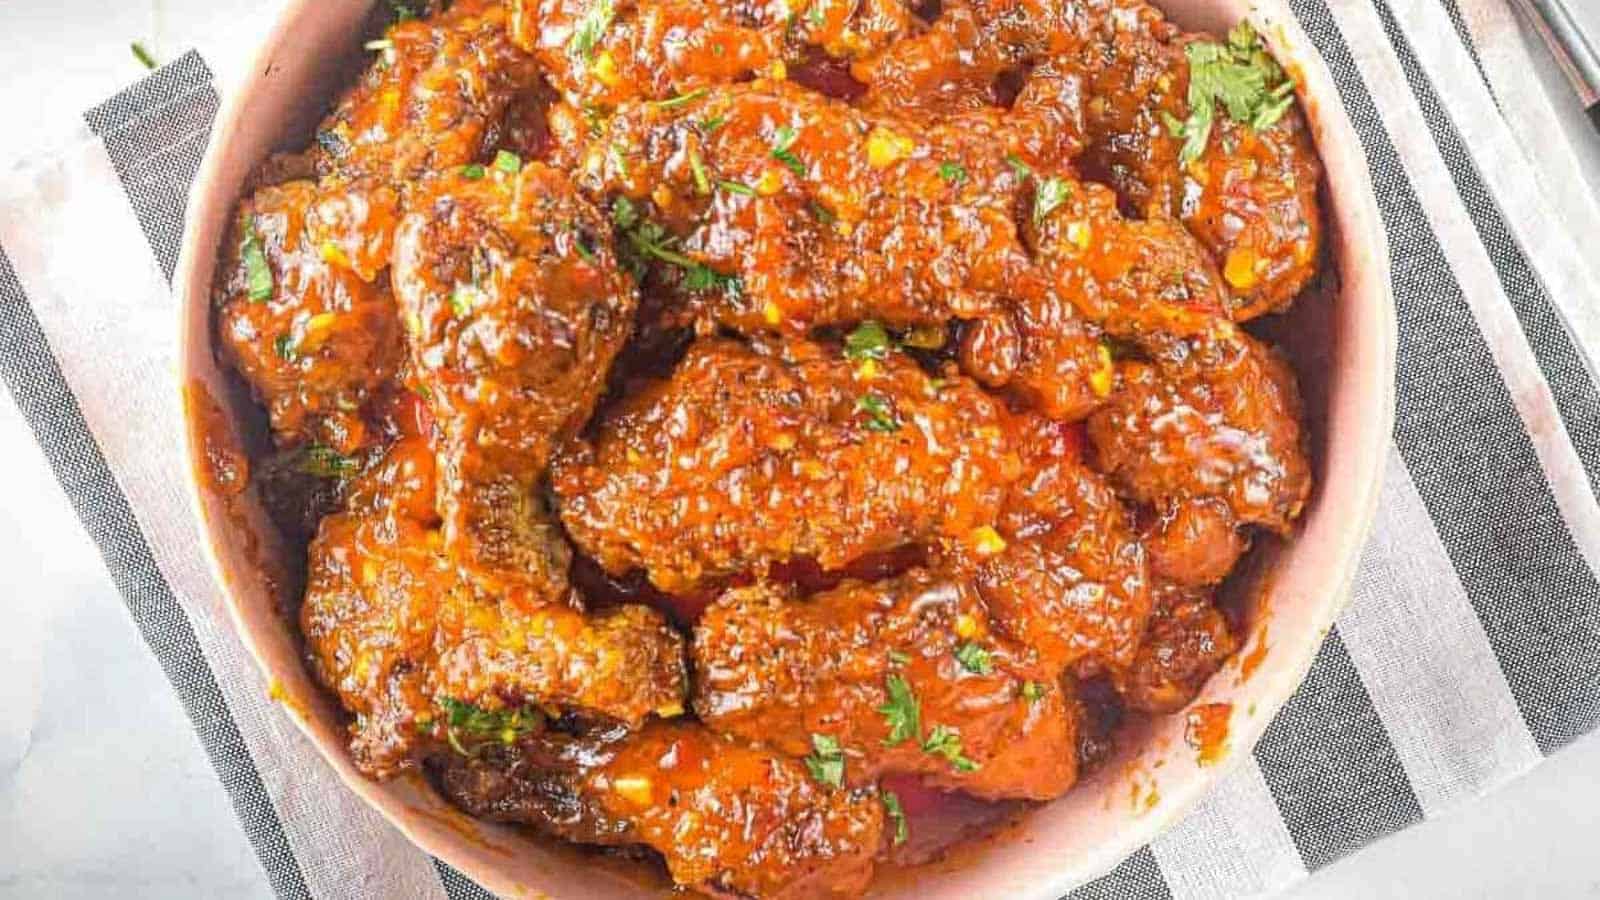 Bowl of Thai sweet chili wings on a gray and white napkin.